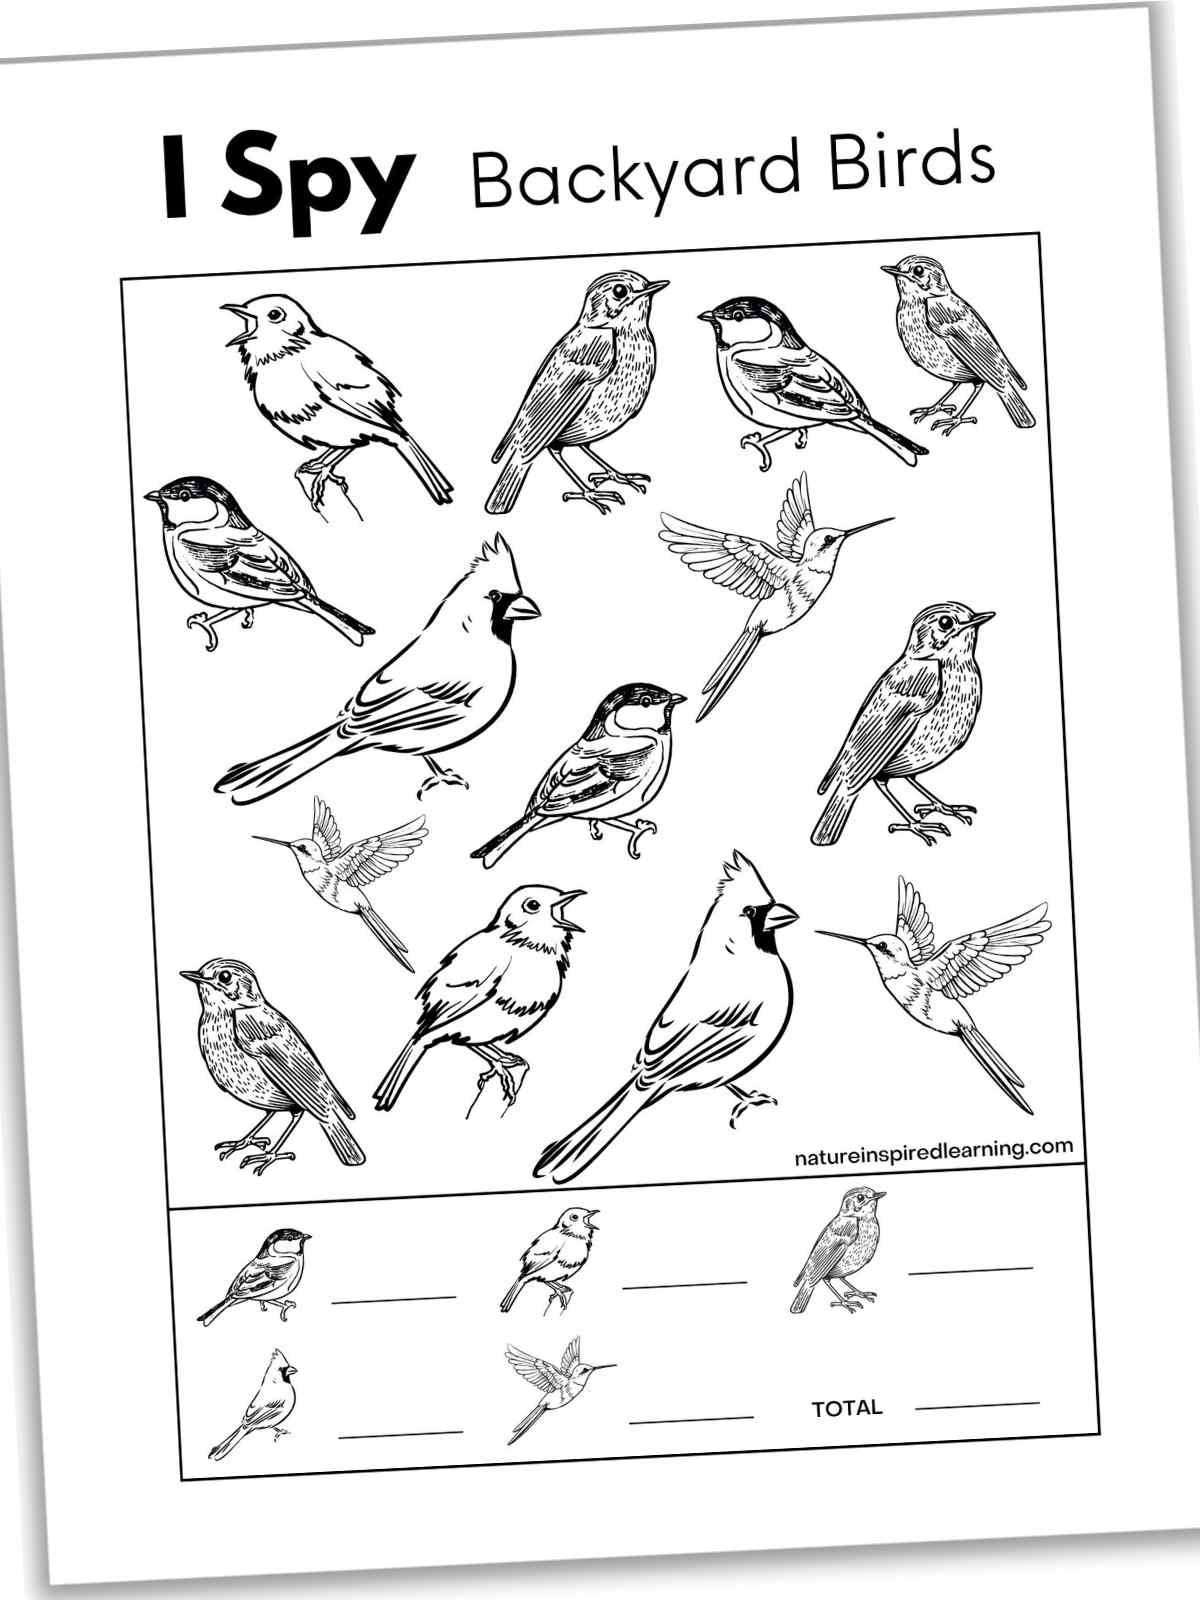 Black and white I spy printable with different birds including a wren, robin, chickadee, cardinal, and hummingbird.